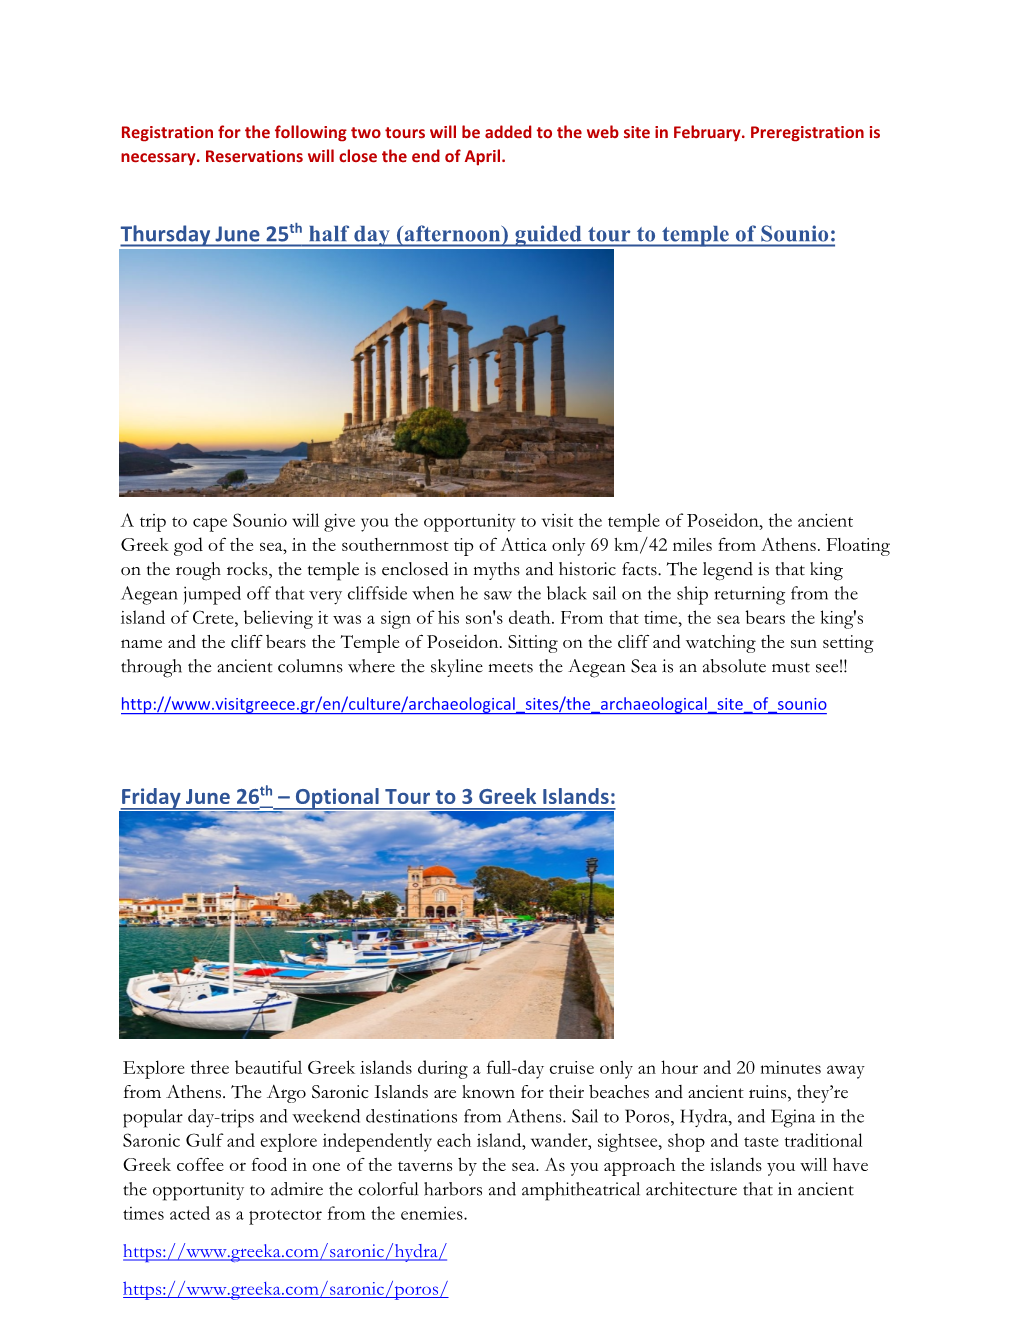 Guided Tour to Temple of Sounio